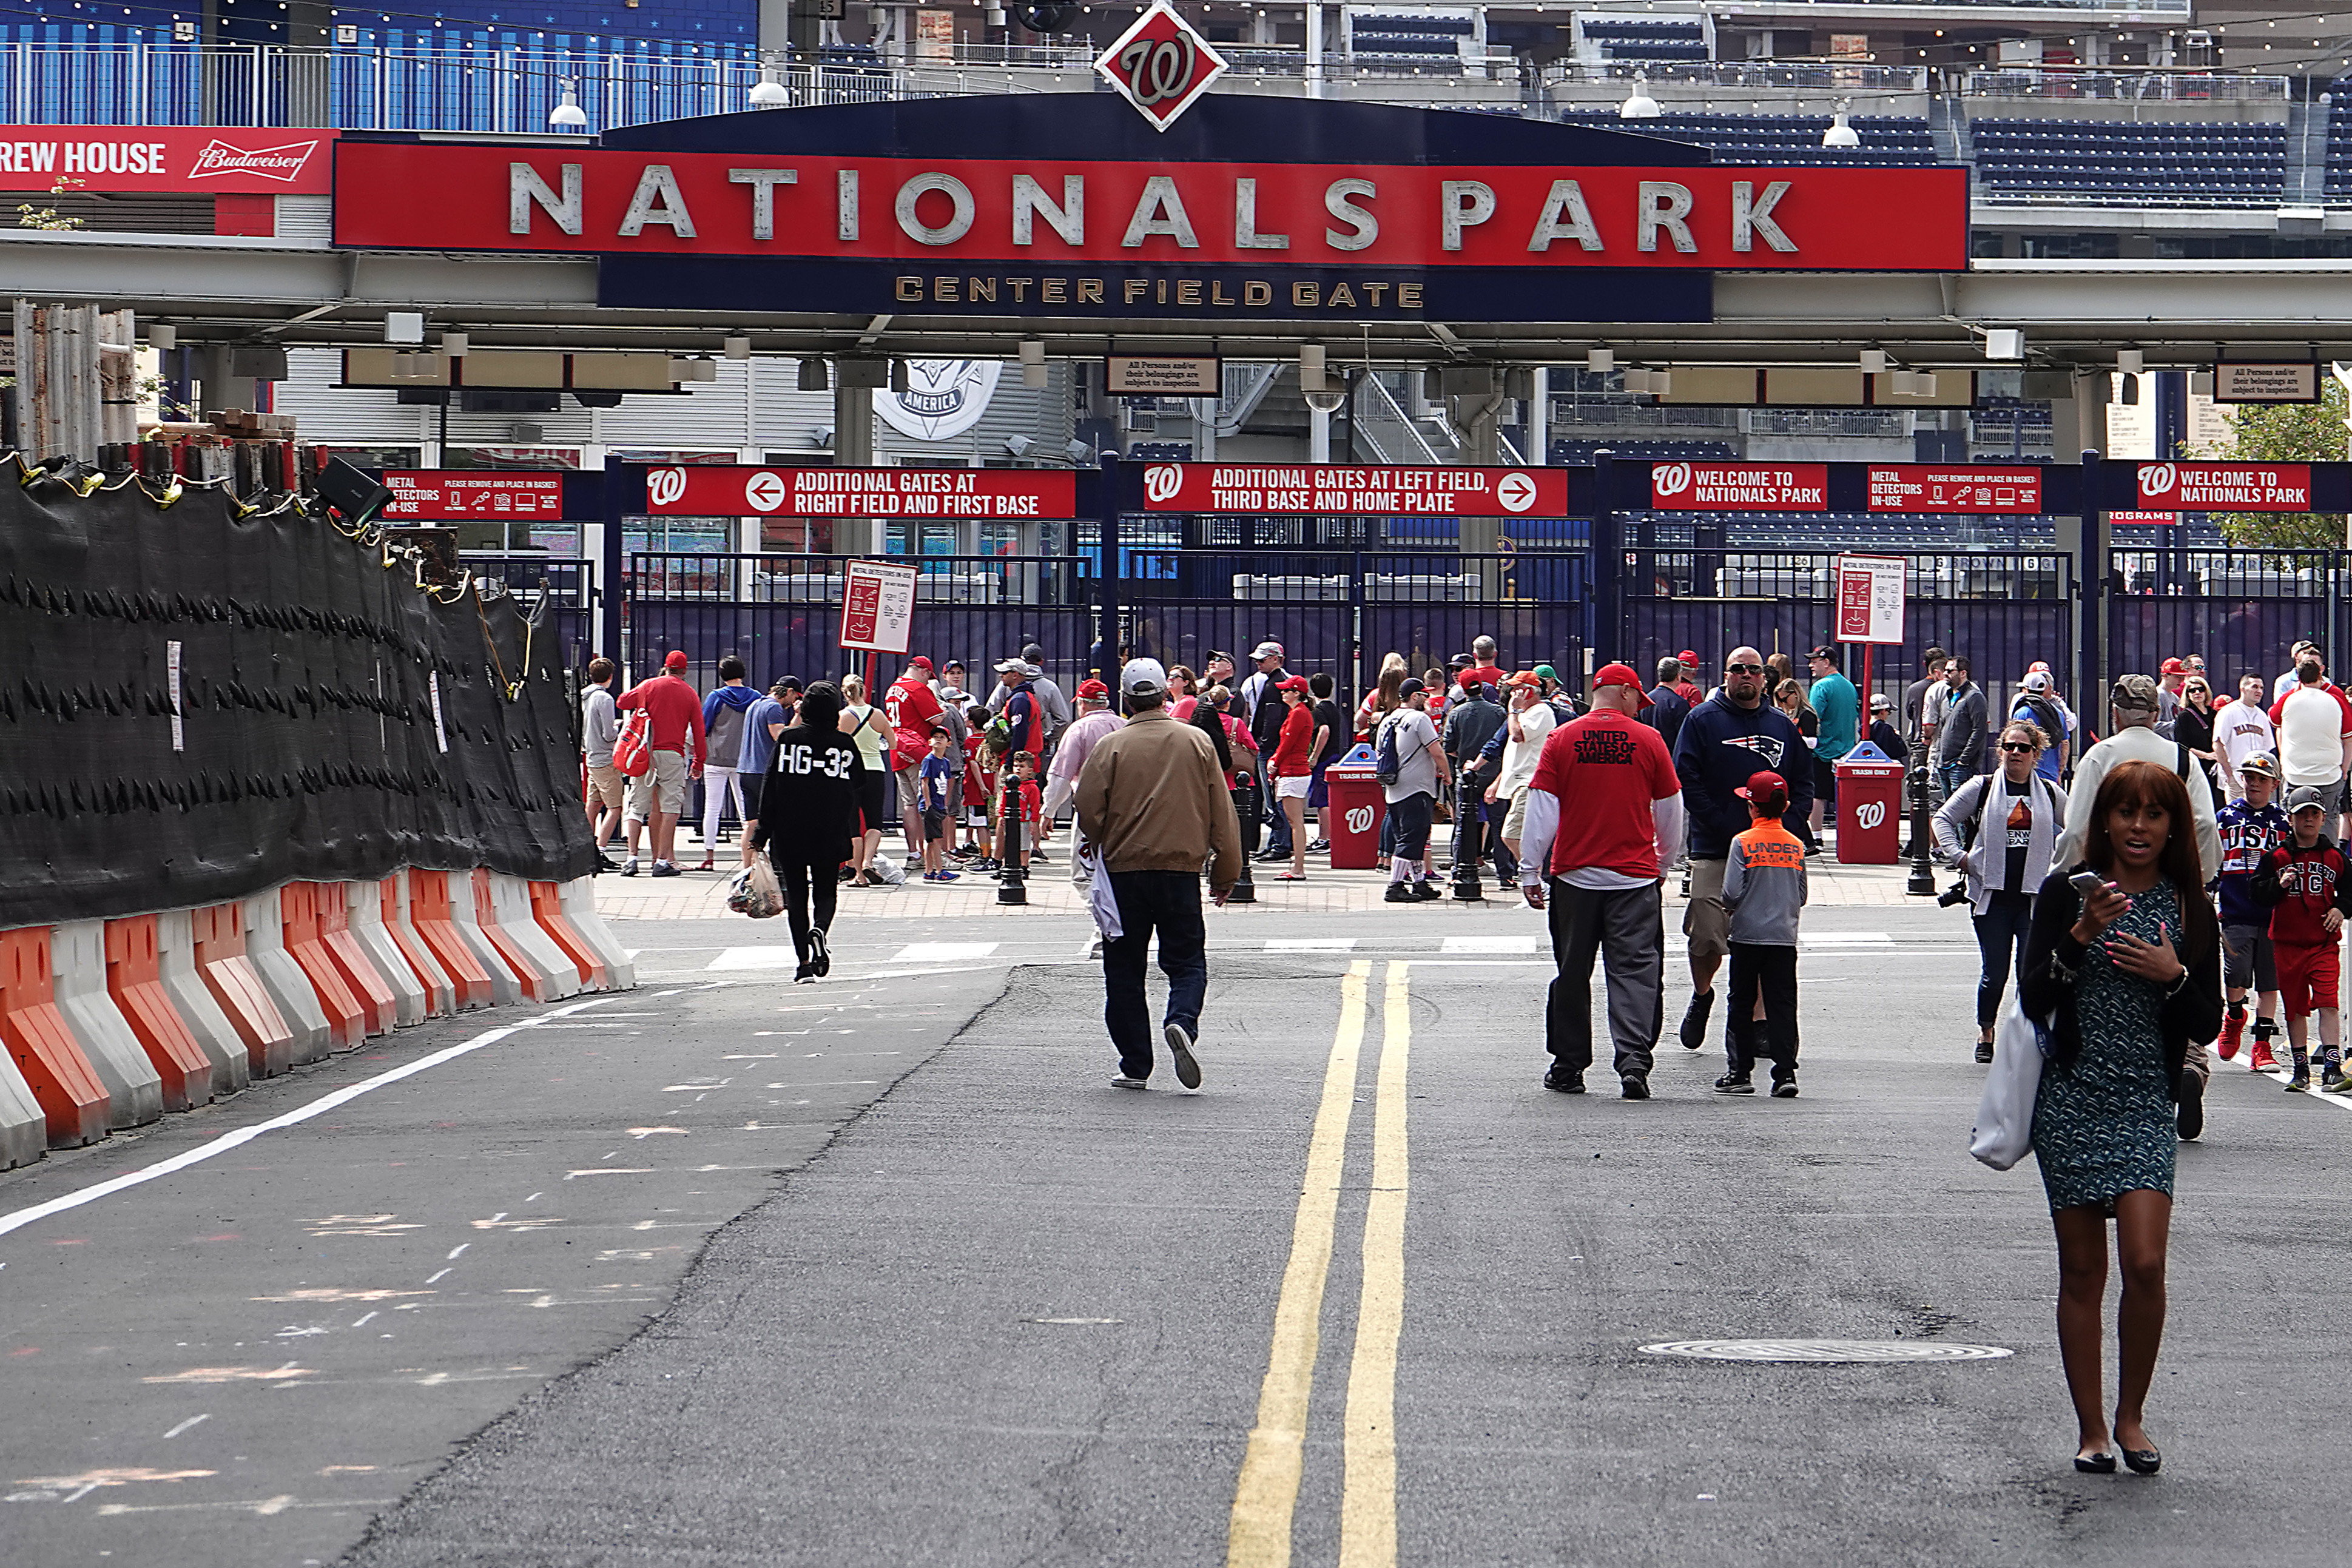 Padres pulled kids into dugout during shooting near Nationals Park